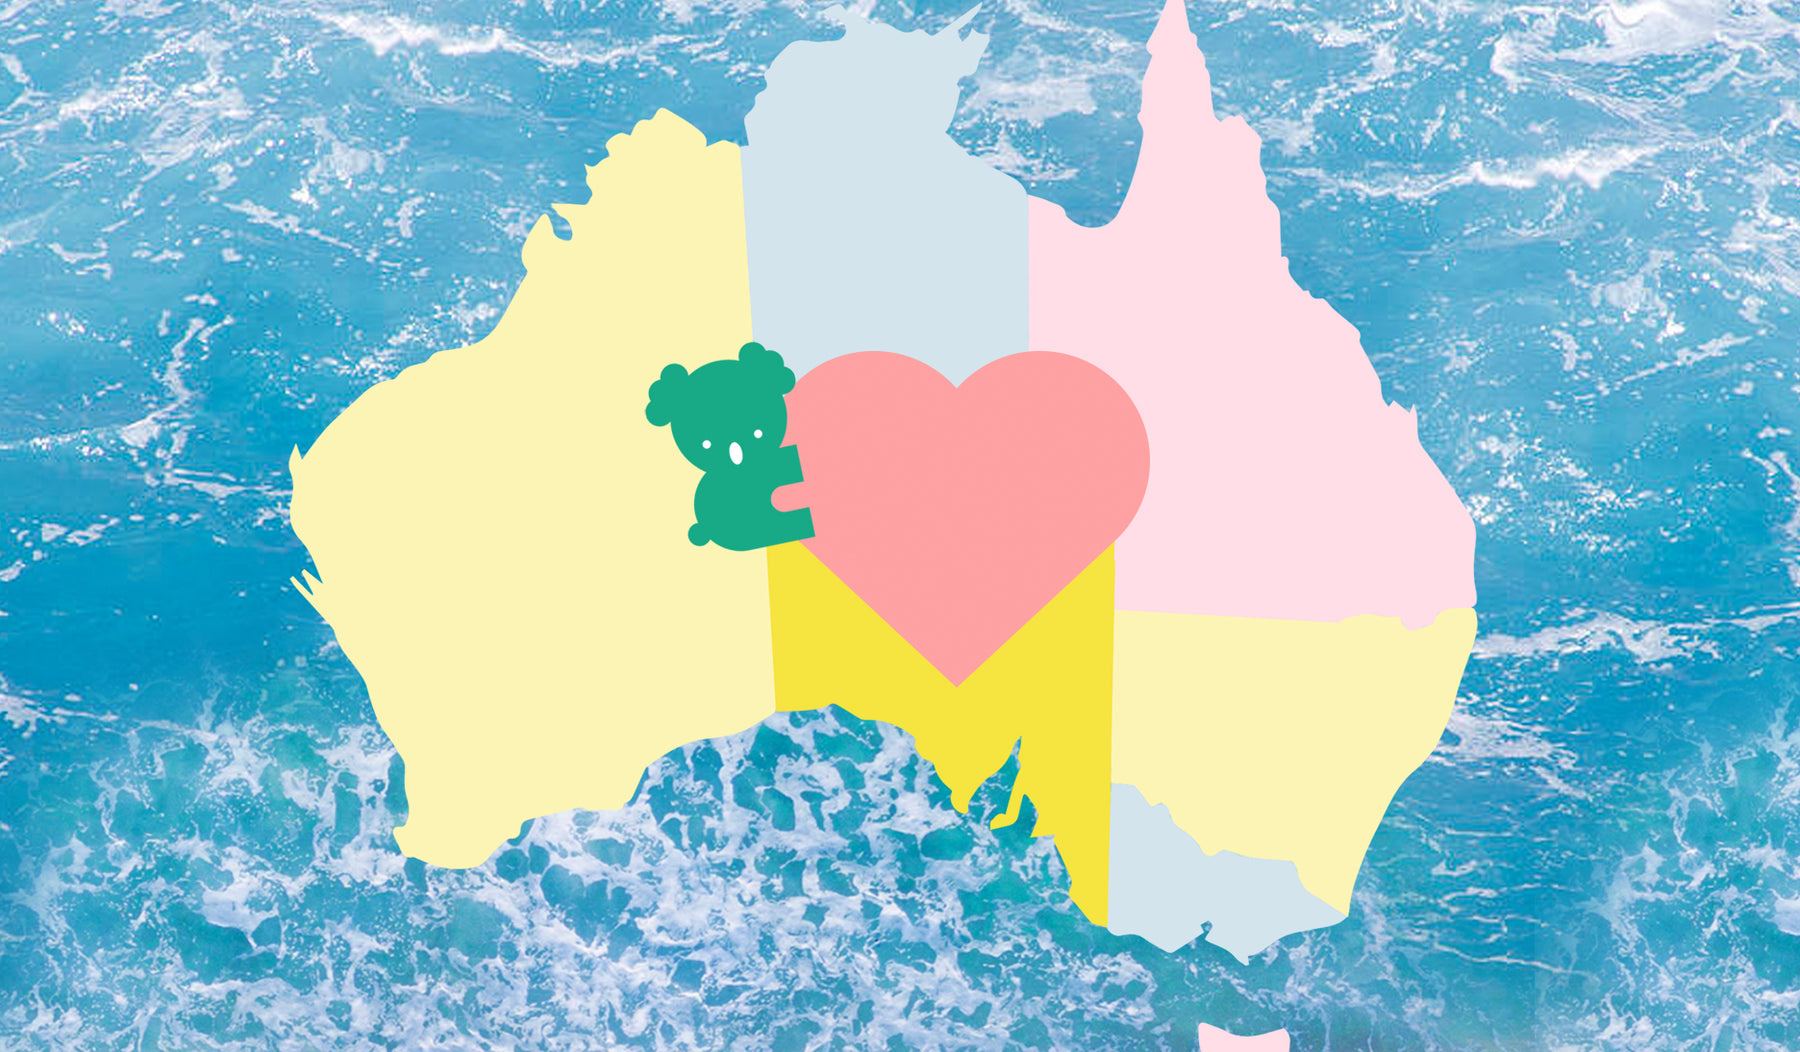 map of Australia over water with koala heart graphic 